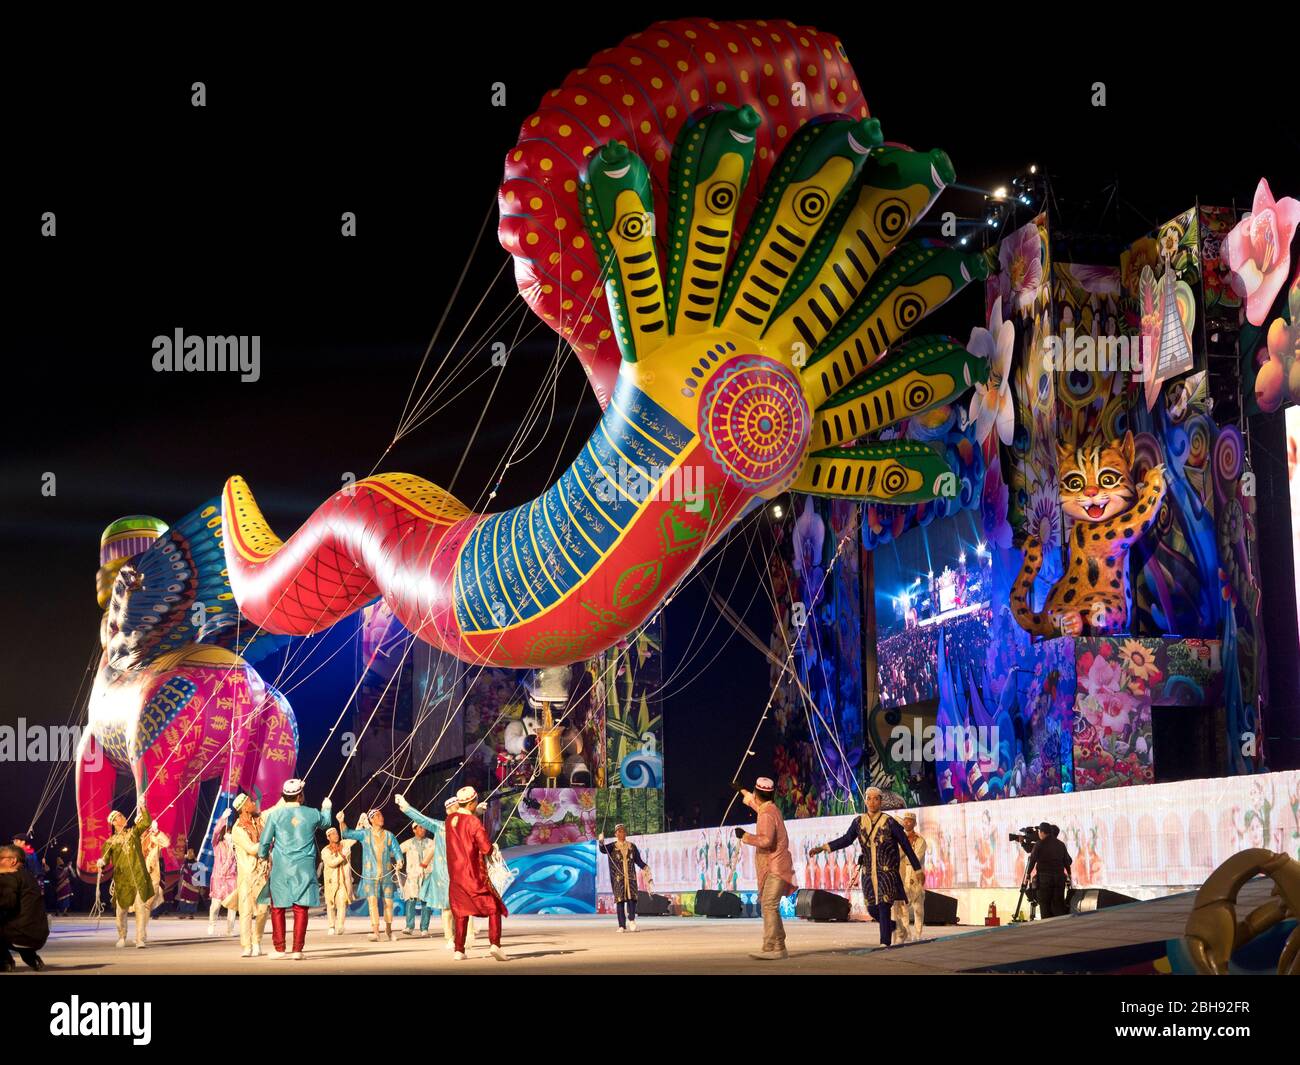 Asia, Taichung World Flora Exposition 2018, opening ceremonies, colourful floats, Taiwan, history, culture Stock Photo